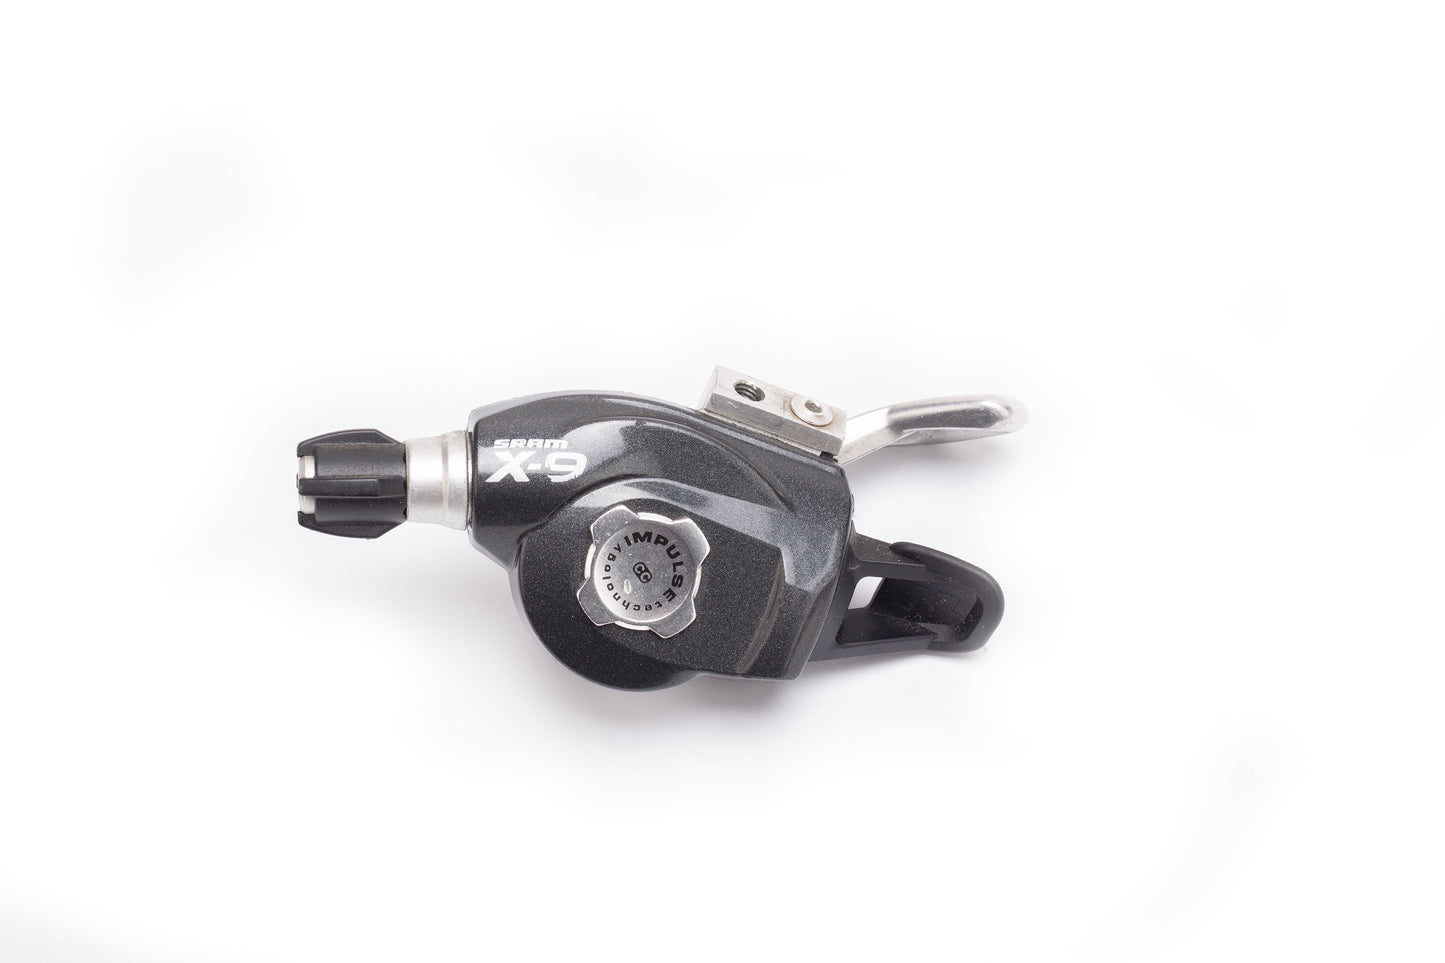 Sram Shift Leve X9 Trigger 3Spd Front GRY